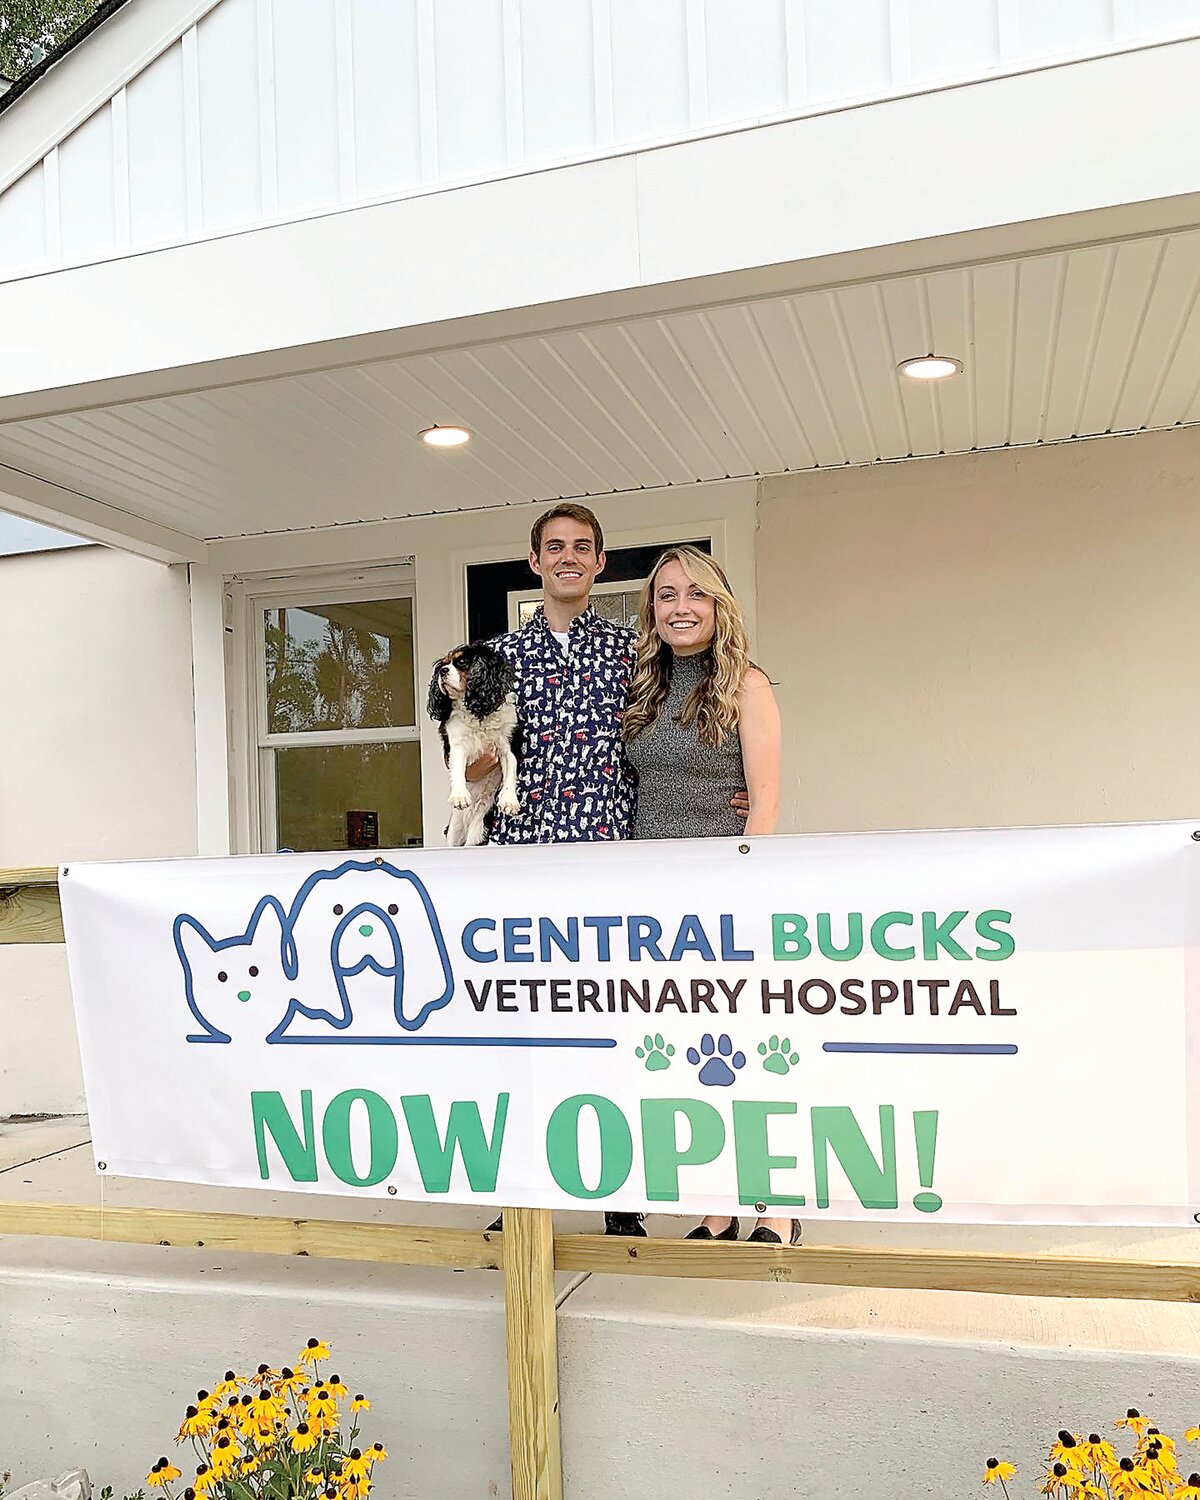 Husband and wife veterinarians and home-grown community members Jack Perkins and Danielle Esplin invite the community to celebrate the opening of their new Central Bucks Veterinary Hospital on Sunday.